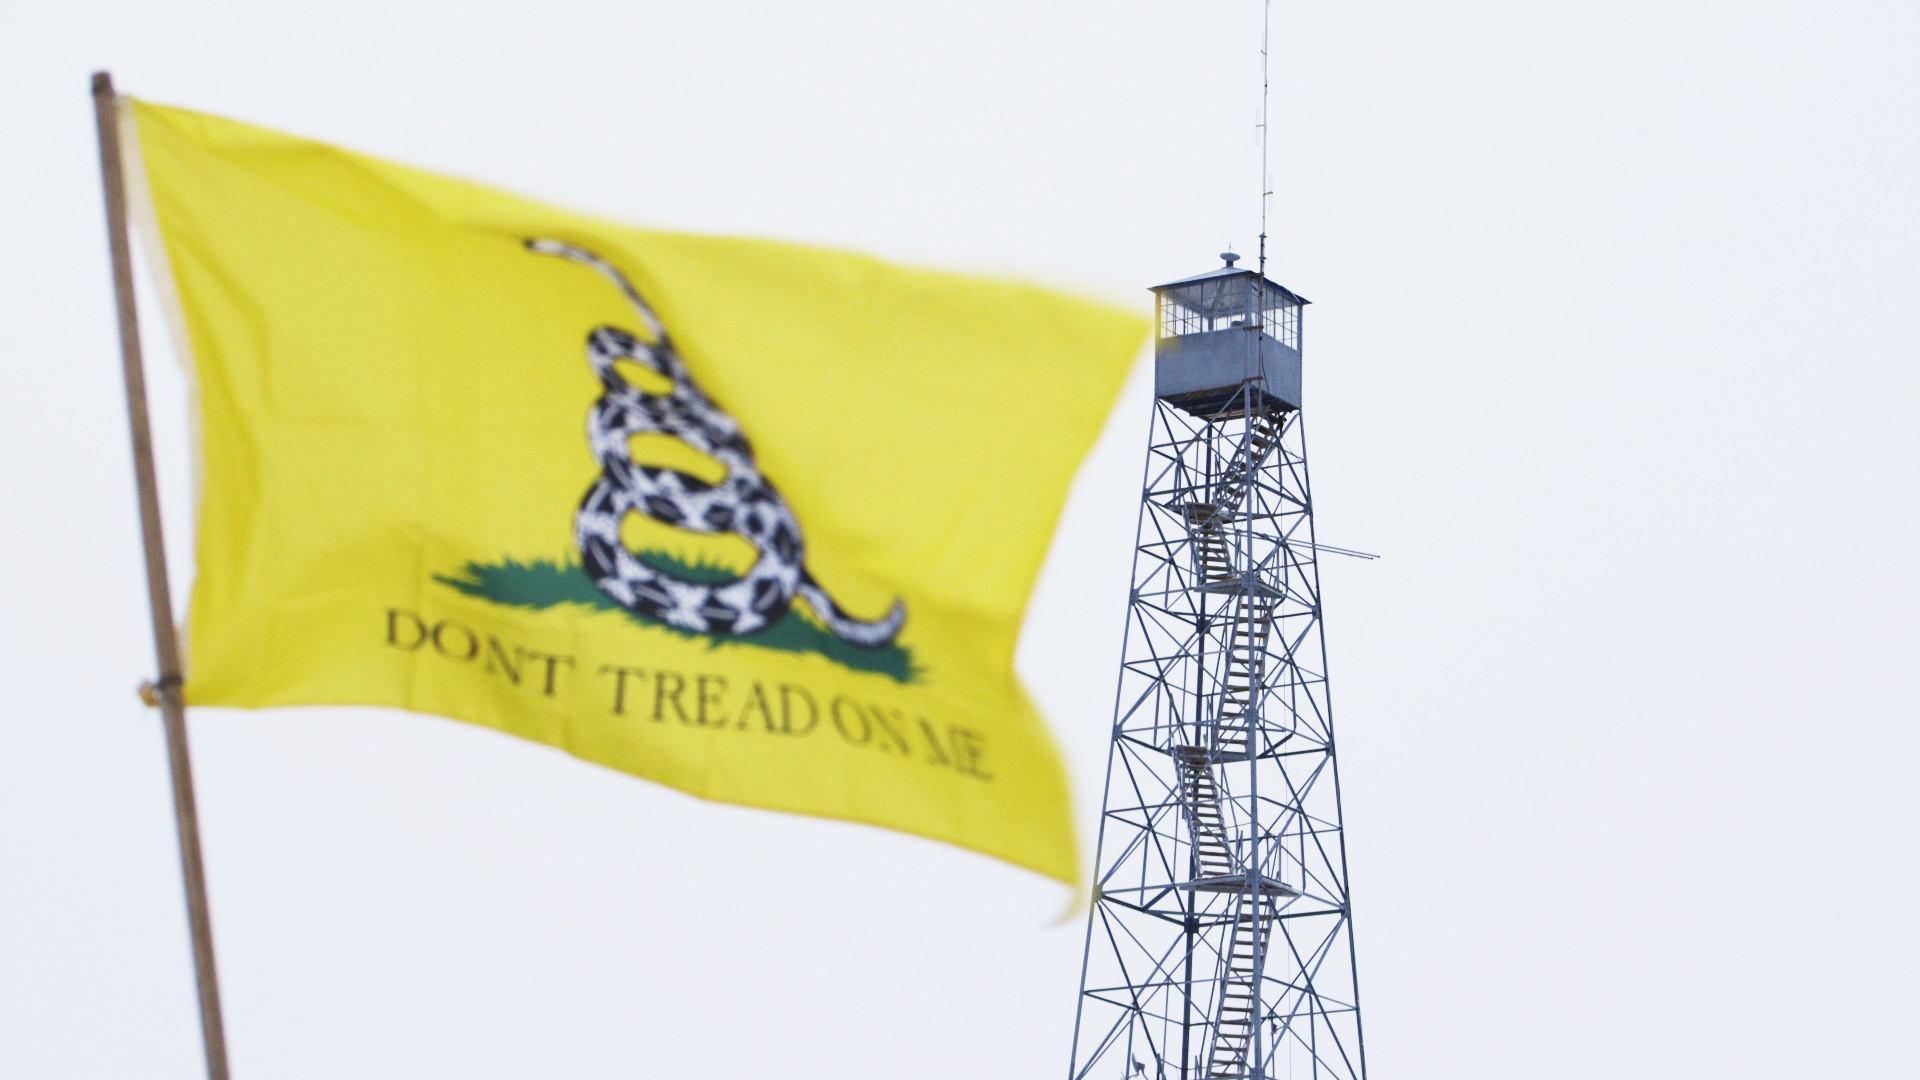 Don't Tread on Me flag in foreground, watch tower in background, from No Man's Land